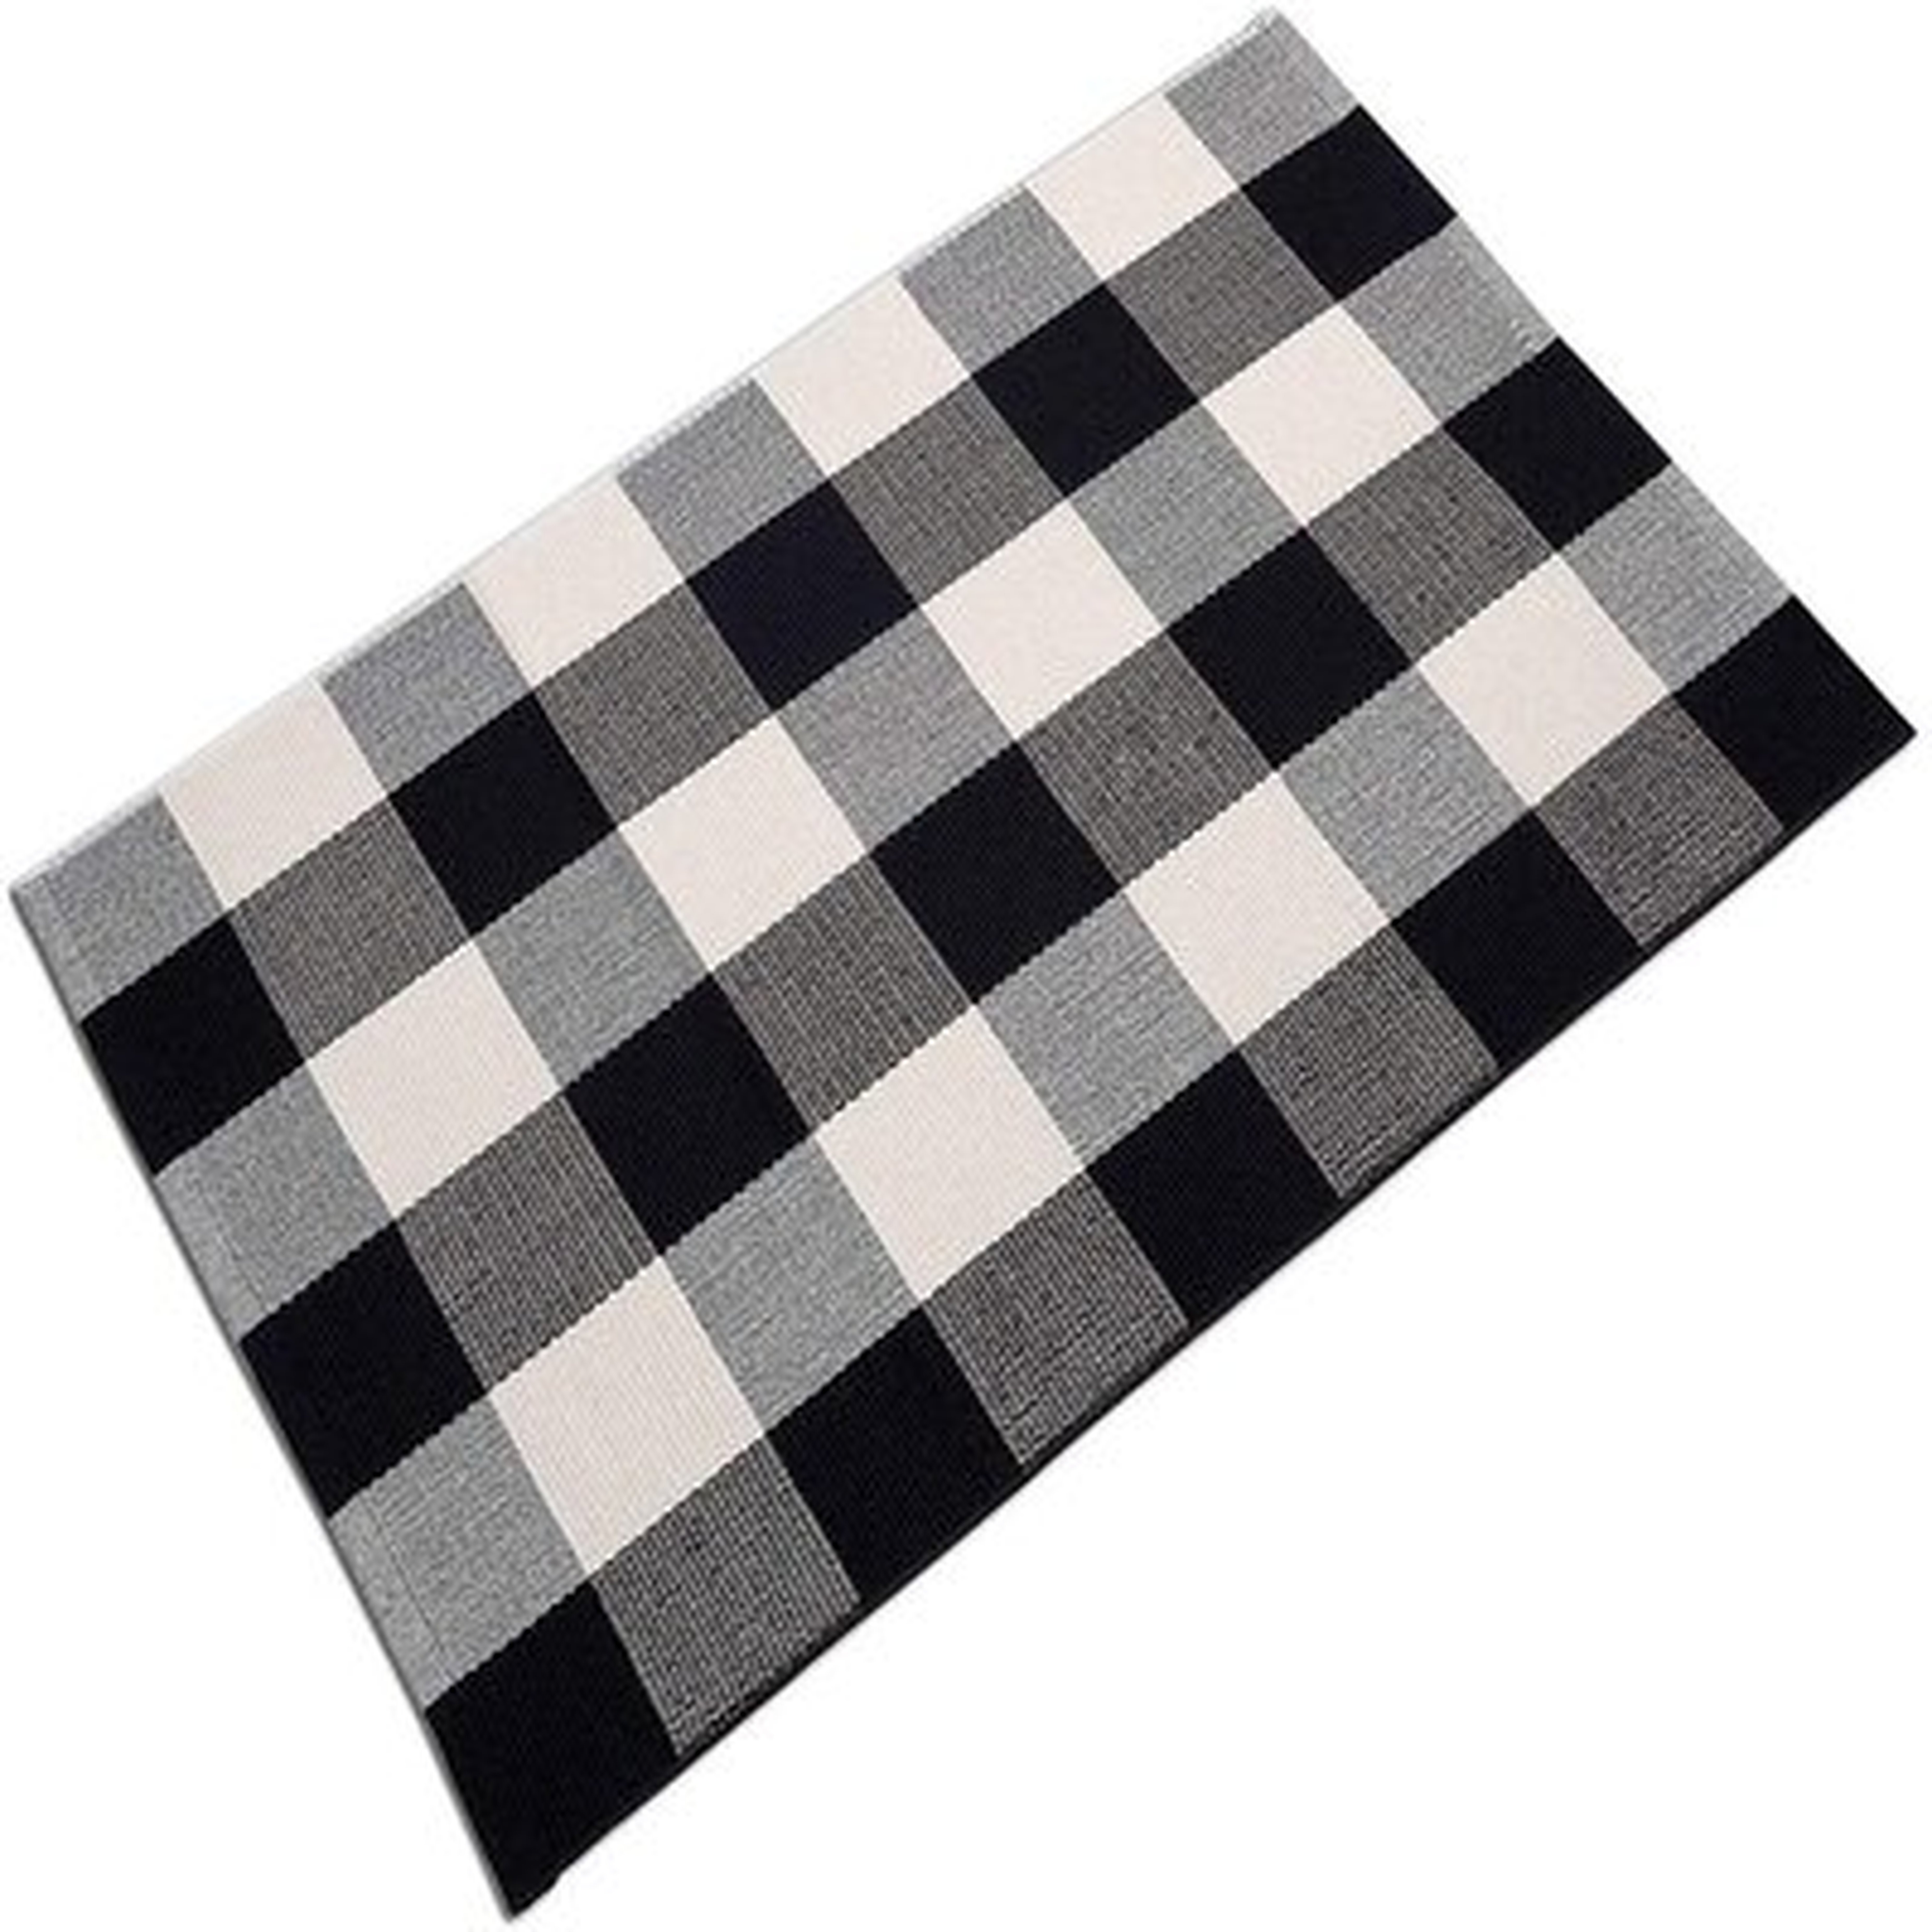 Buffalo Plaid Door Mat/Rug  Check Rugs Reversible Washable Cotton Hand-Woven Outdoor Rugs For Layered Door Mats Porch/Kitchen/Farmhouse - Wayfair